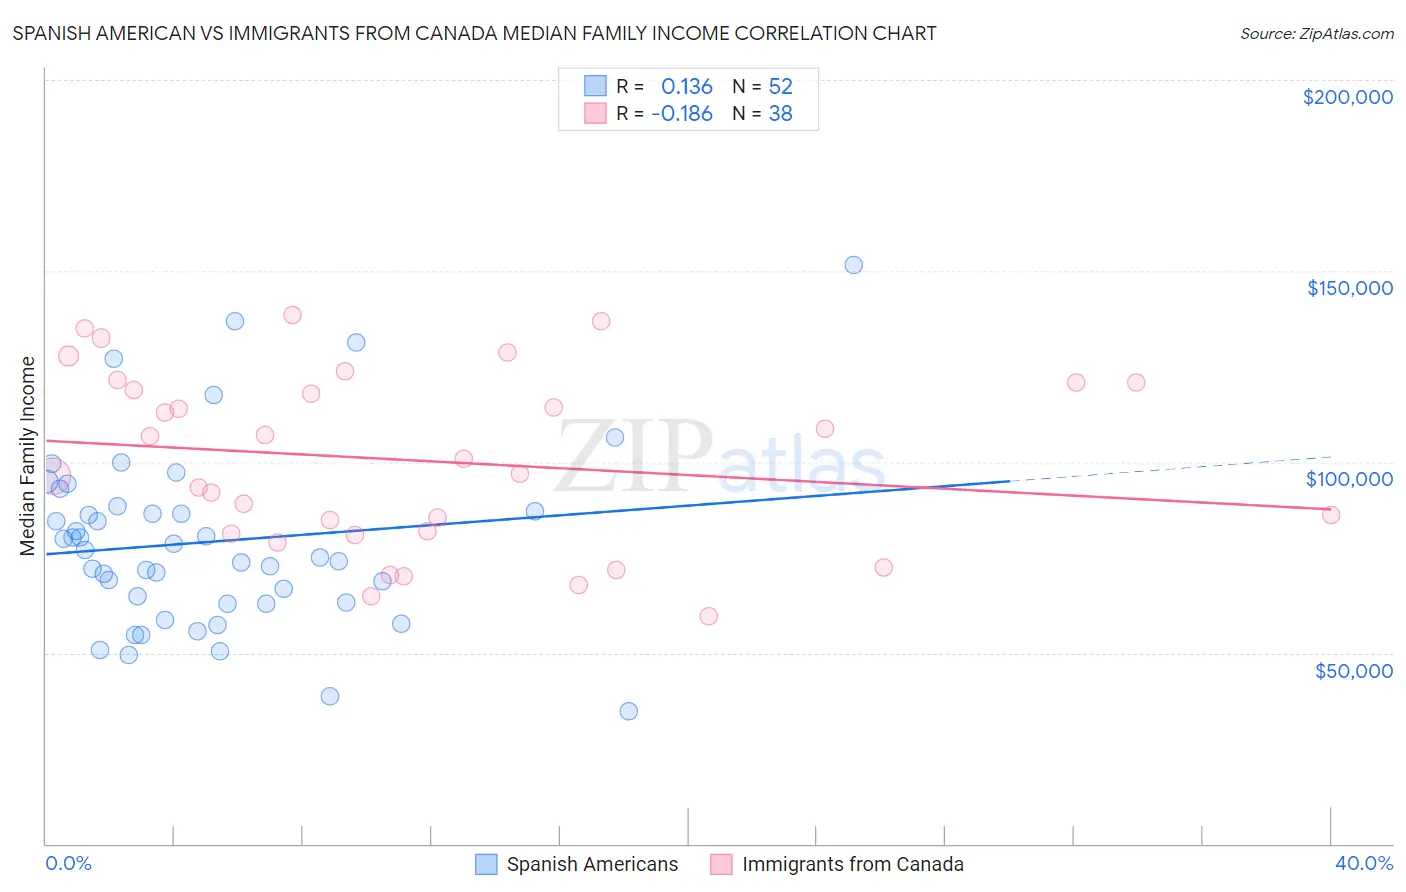 Spanish American vs Immigrants from Canada Median Family Income